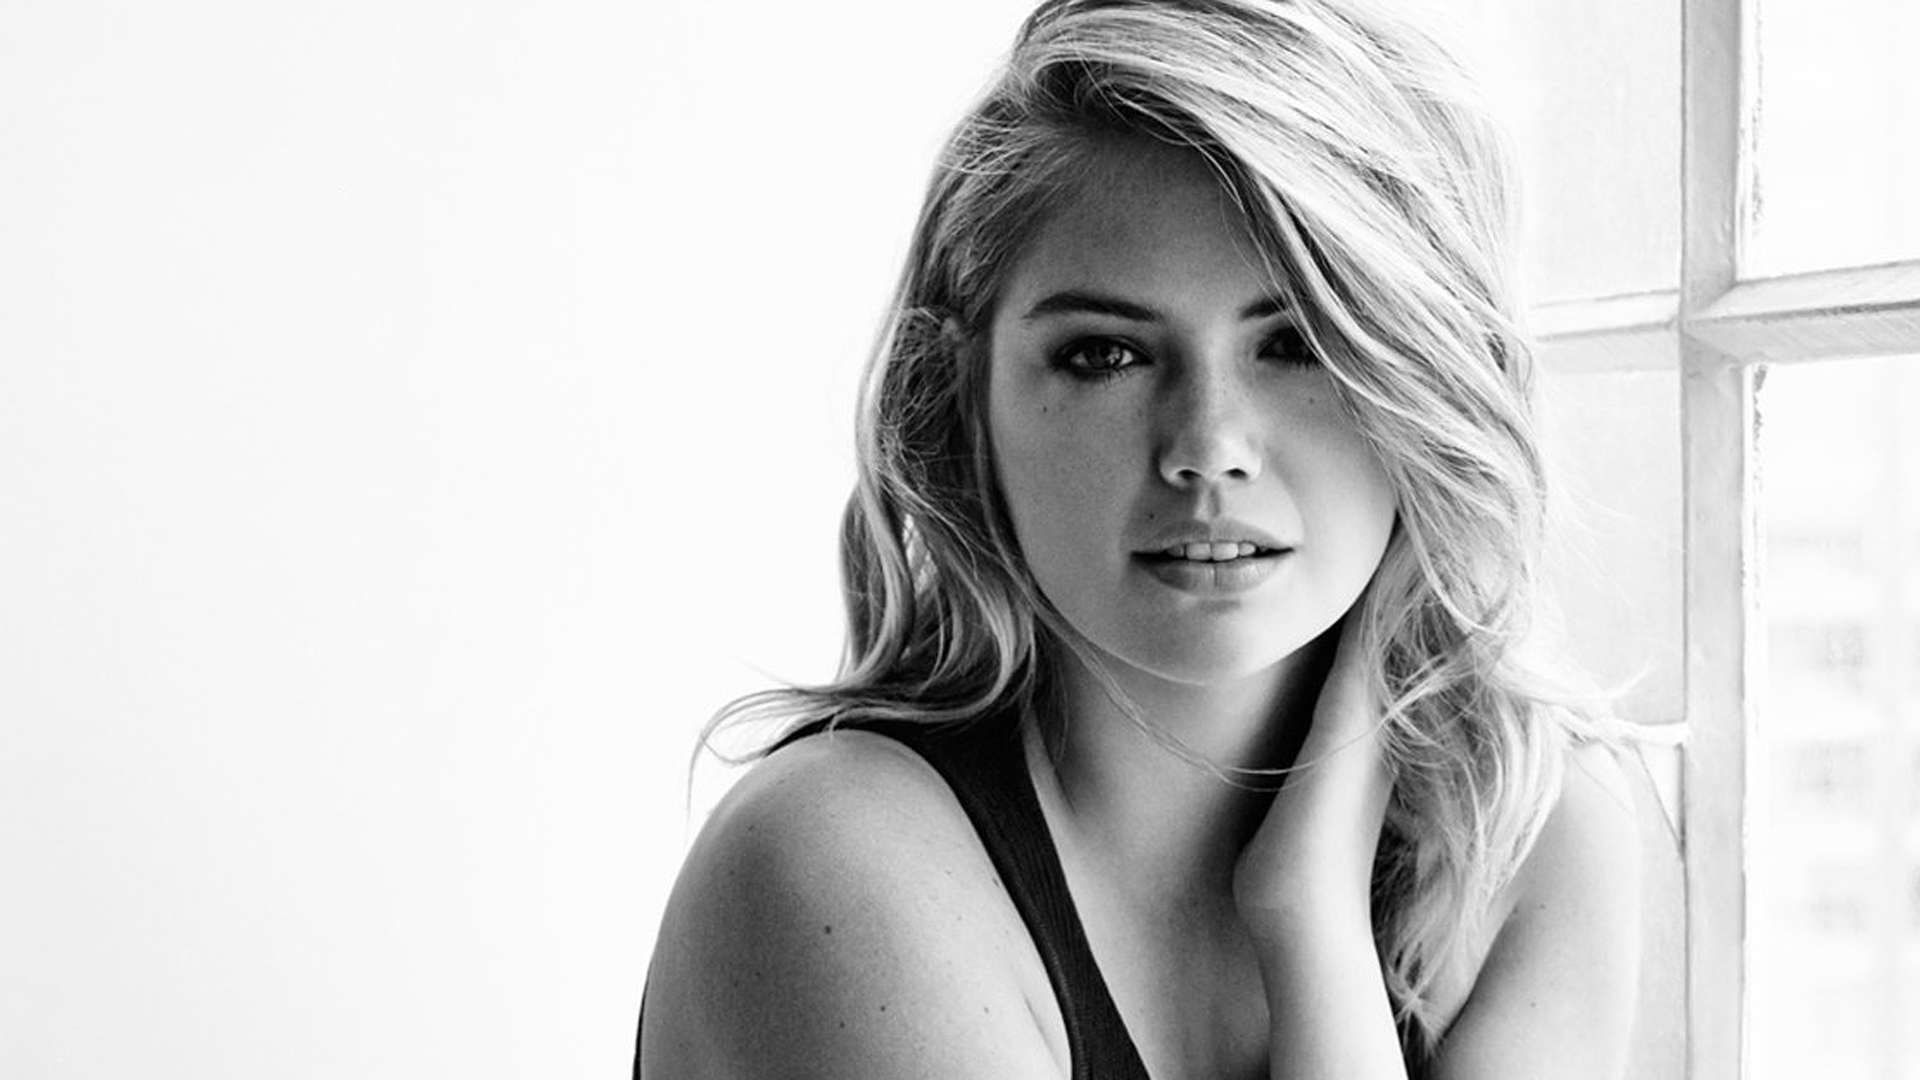 Kate Upton Black and White Photo Shoot Wallpapers